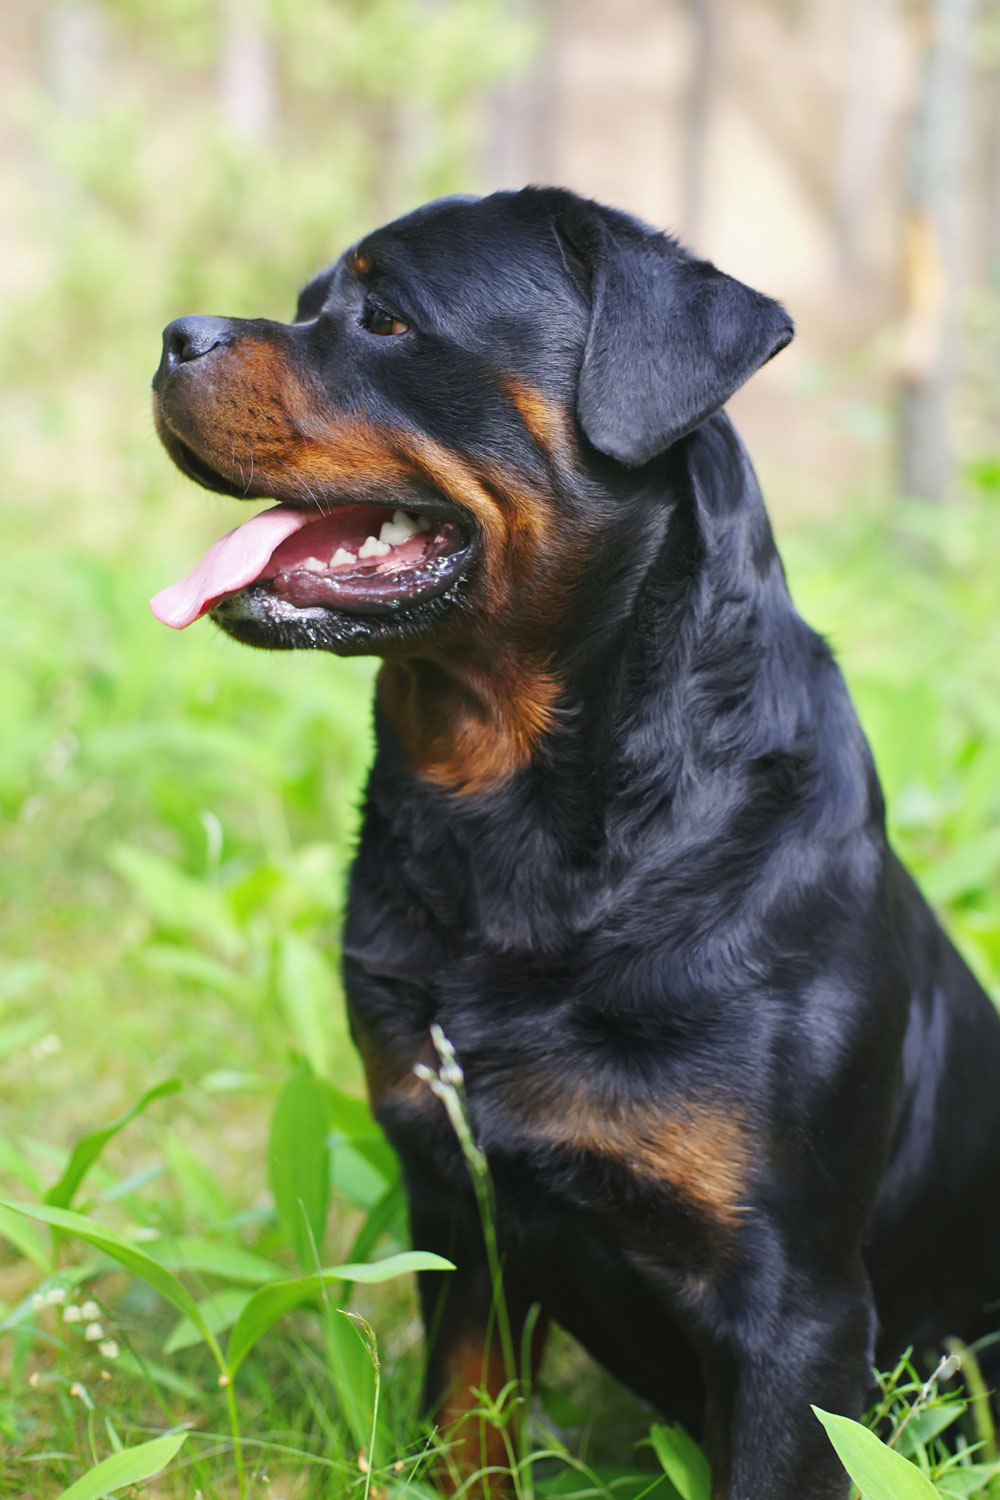 Rottweilers